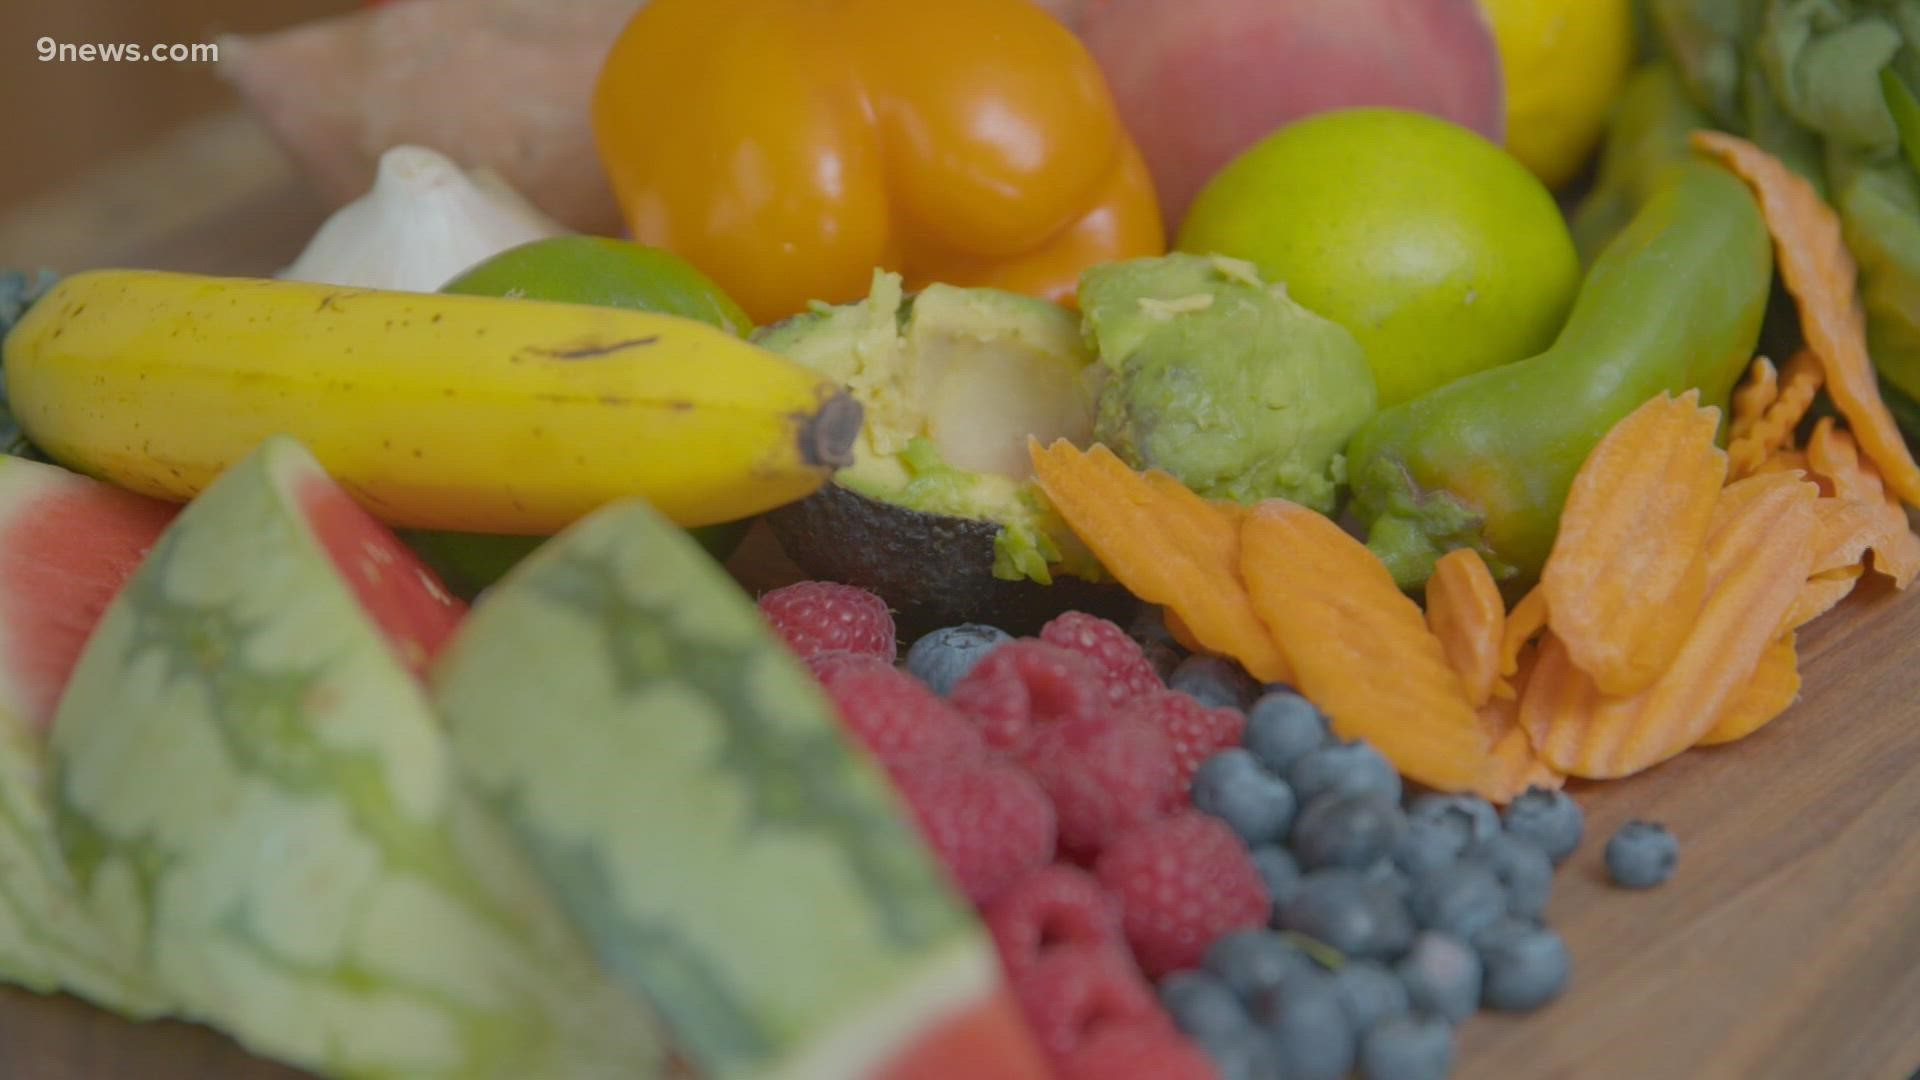 9NEWS nutrition expert Kristin Kirkpatrick shares some ways utilize wilted produce and avoid food waste.